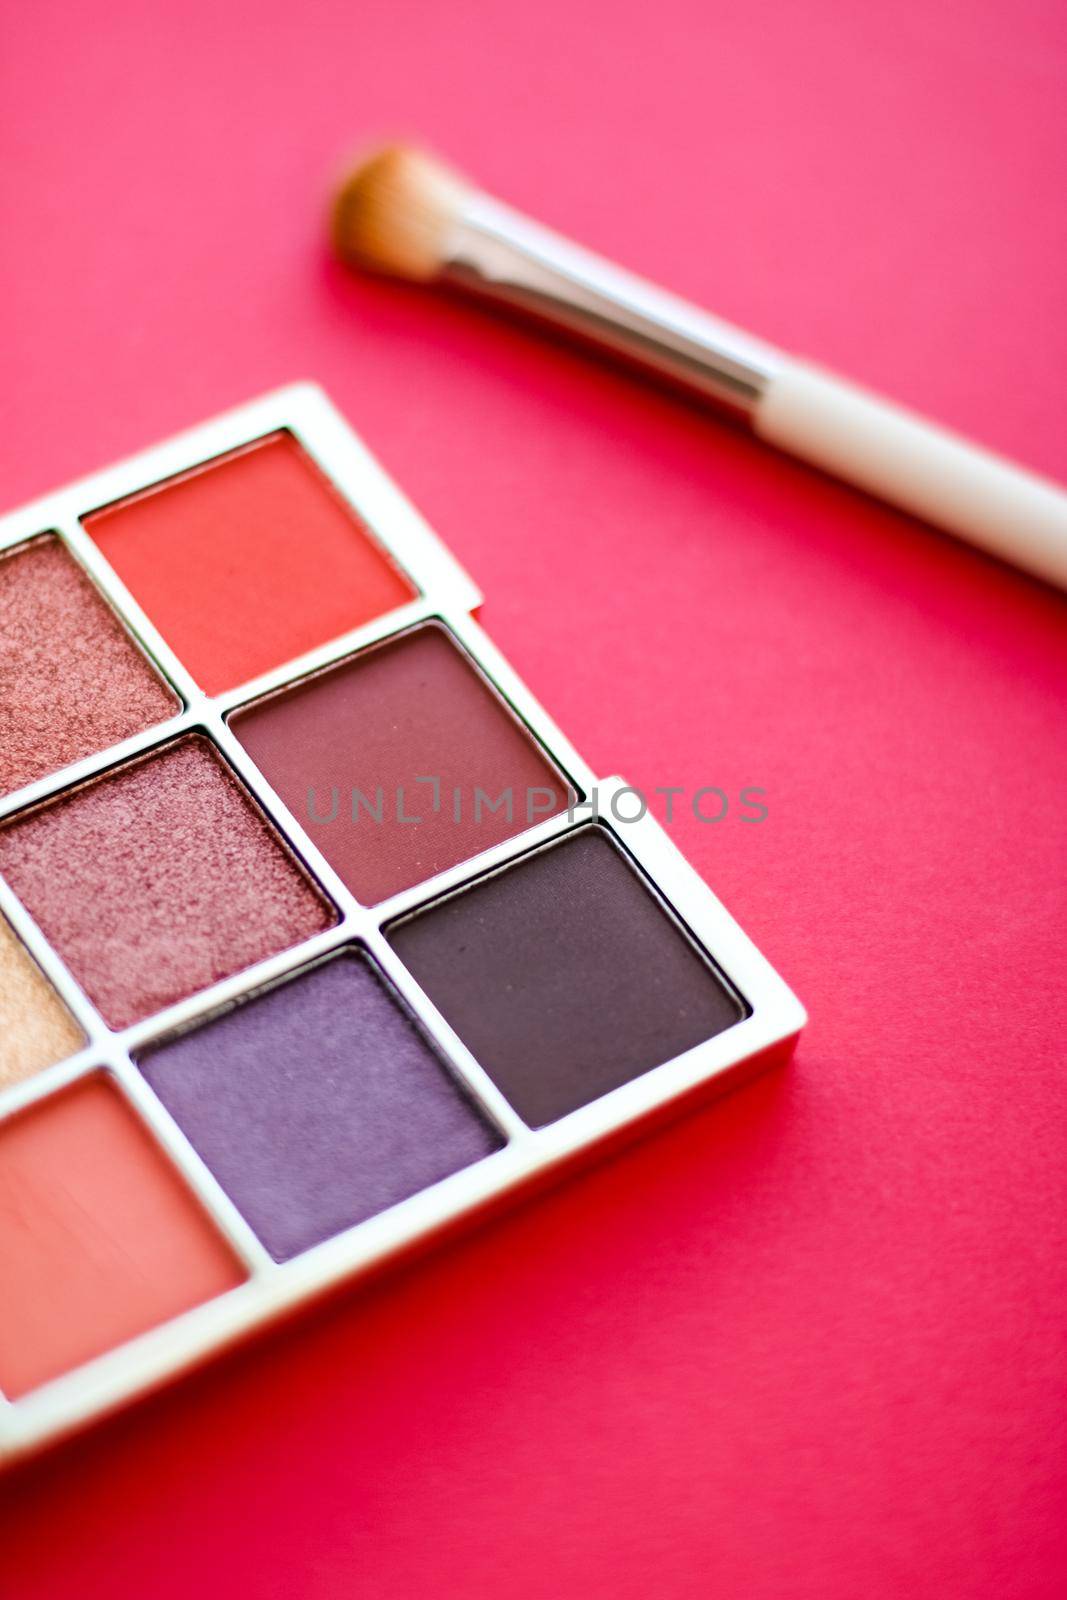 Cosmetic branding, mua and girly concept - Eyeshadow palette and make-up brush on red background, eye shadows cosmetics product for luxury beauty brand promotion and holiday fashion blog design